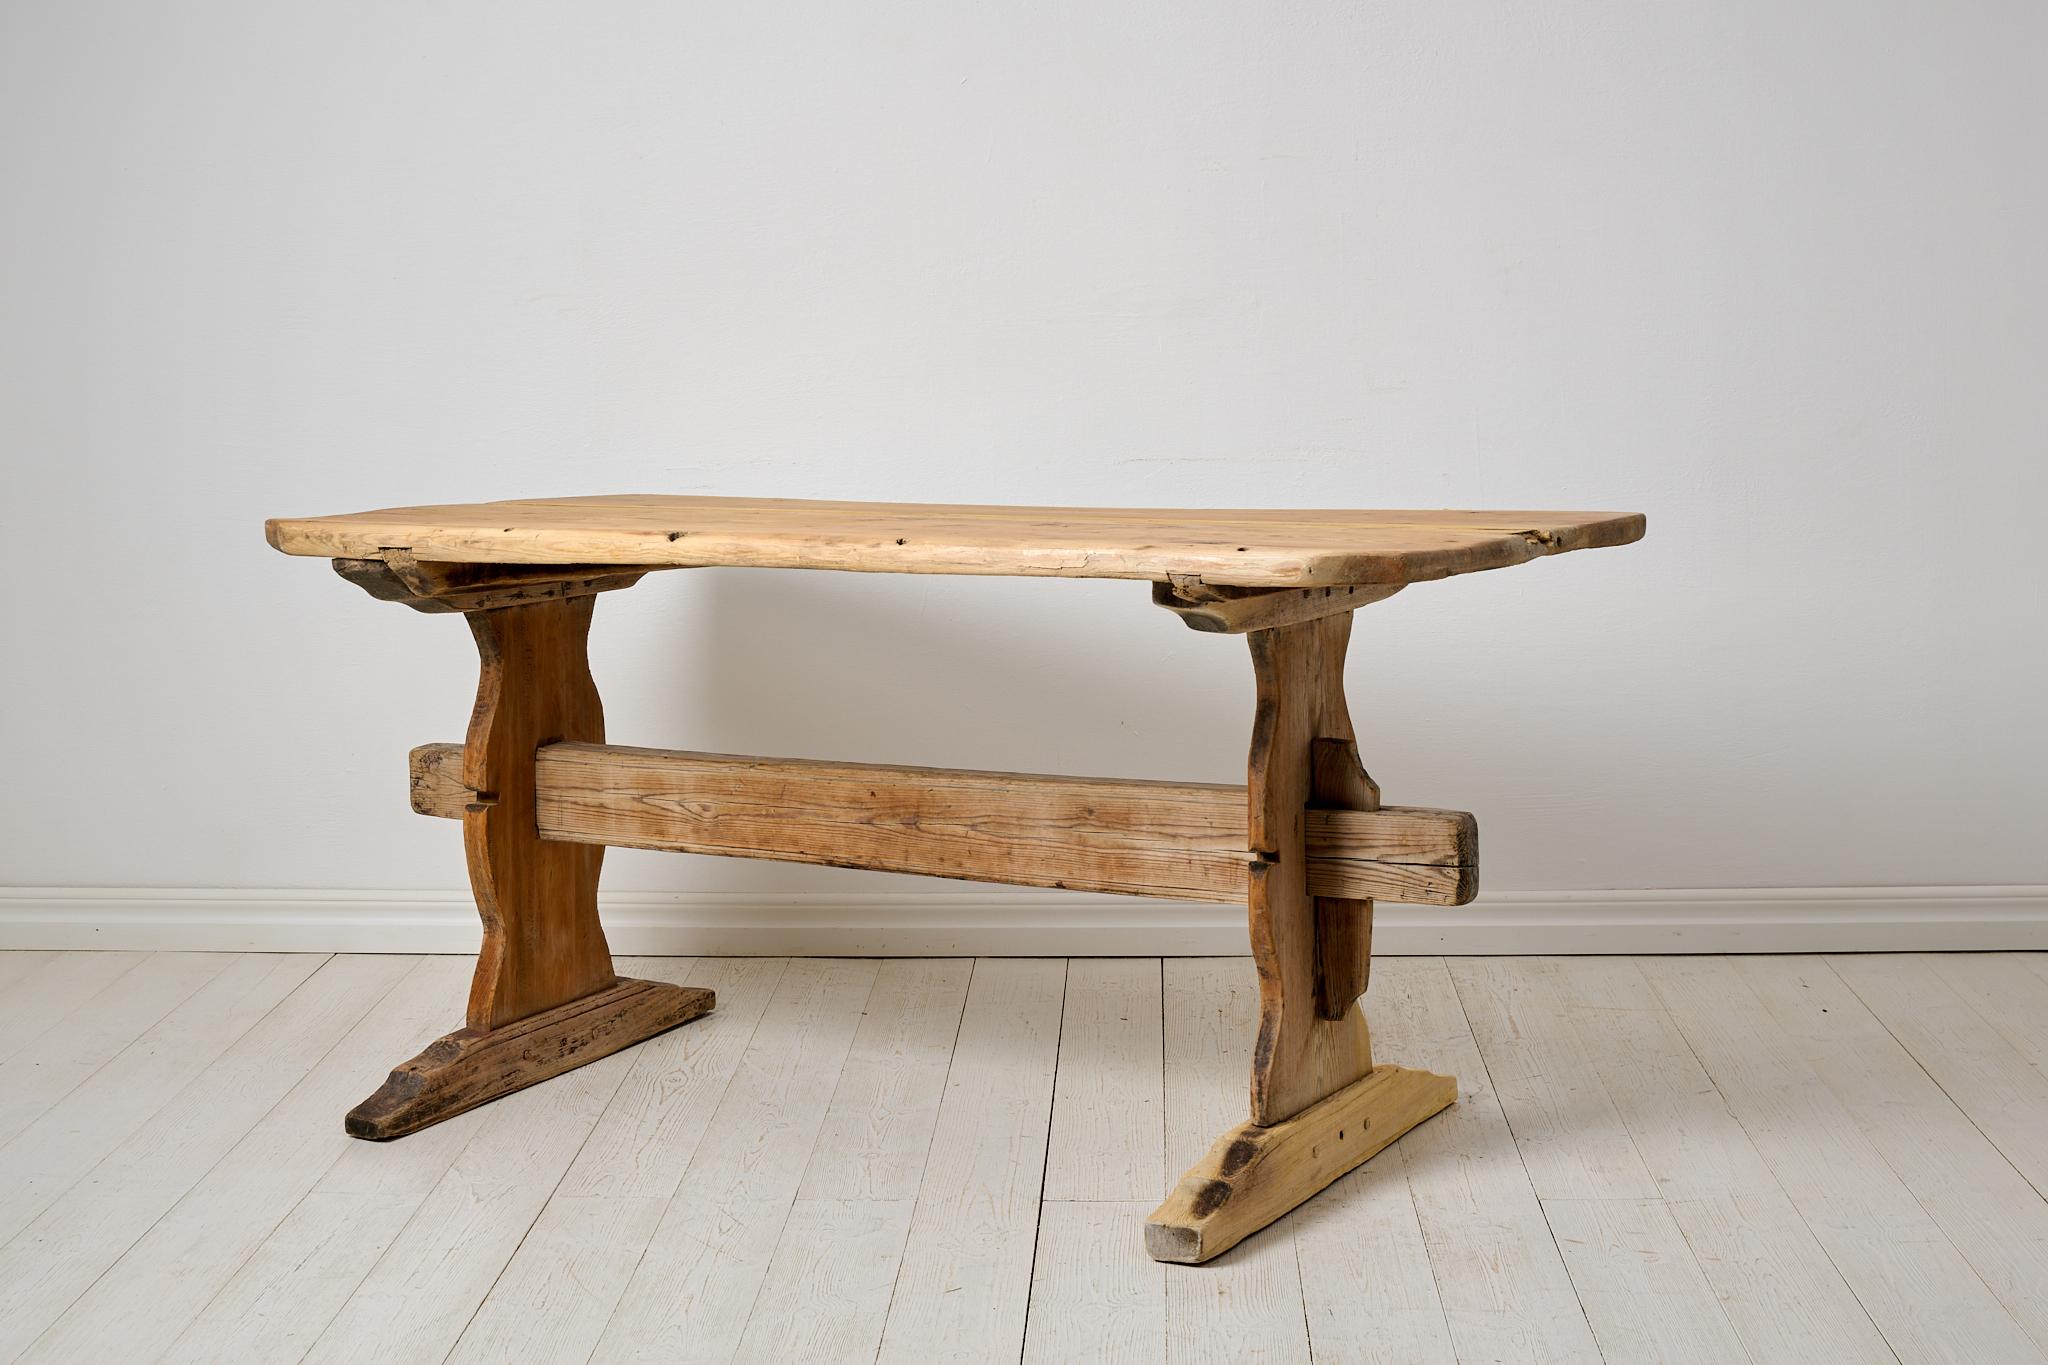 Folk art trestle table, dining or work table from northern Sweden. The table is a genuine antique and made unusually sturdy and charming. The table top is thick and heavy, made from just 2 large boards of wood. Made by hand around the mid 1700s in